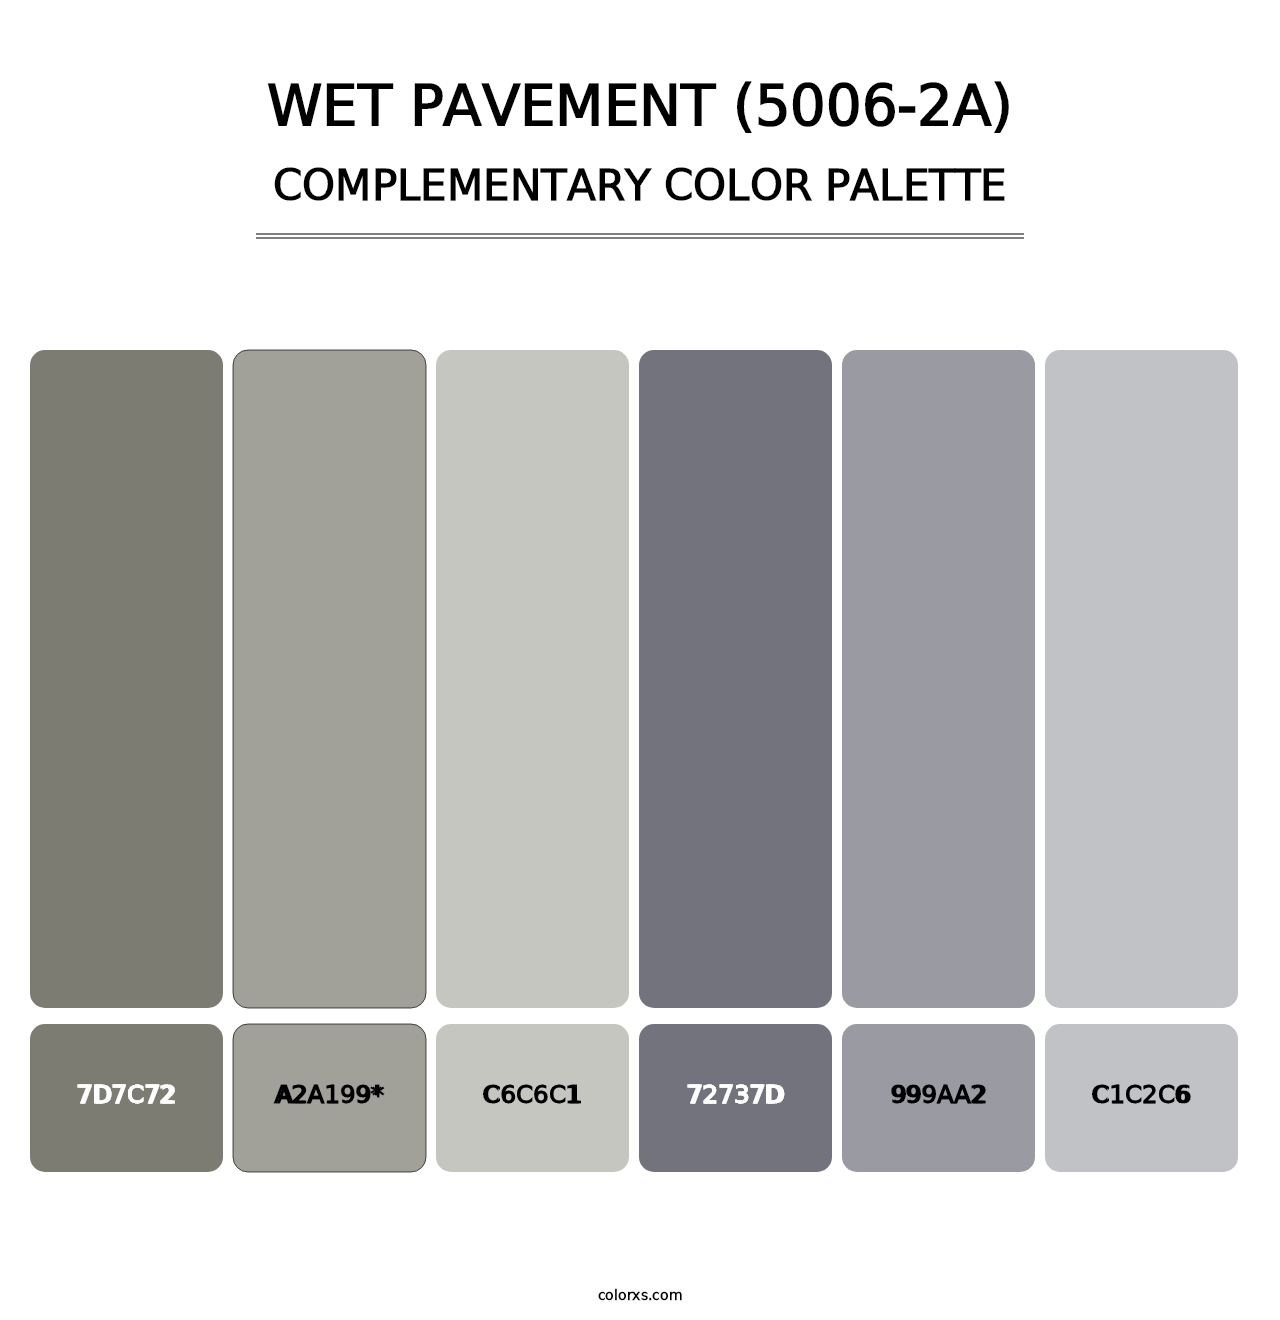 Wet Pavement (5006-2A) - Complementary Color Palette